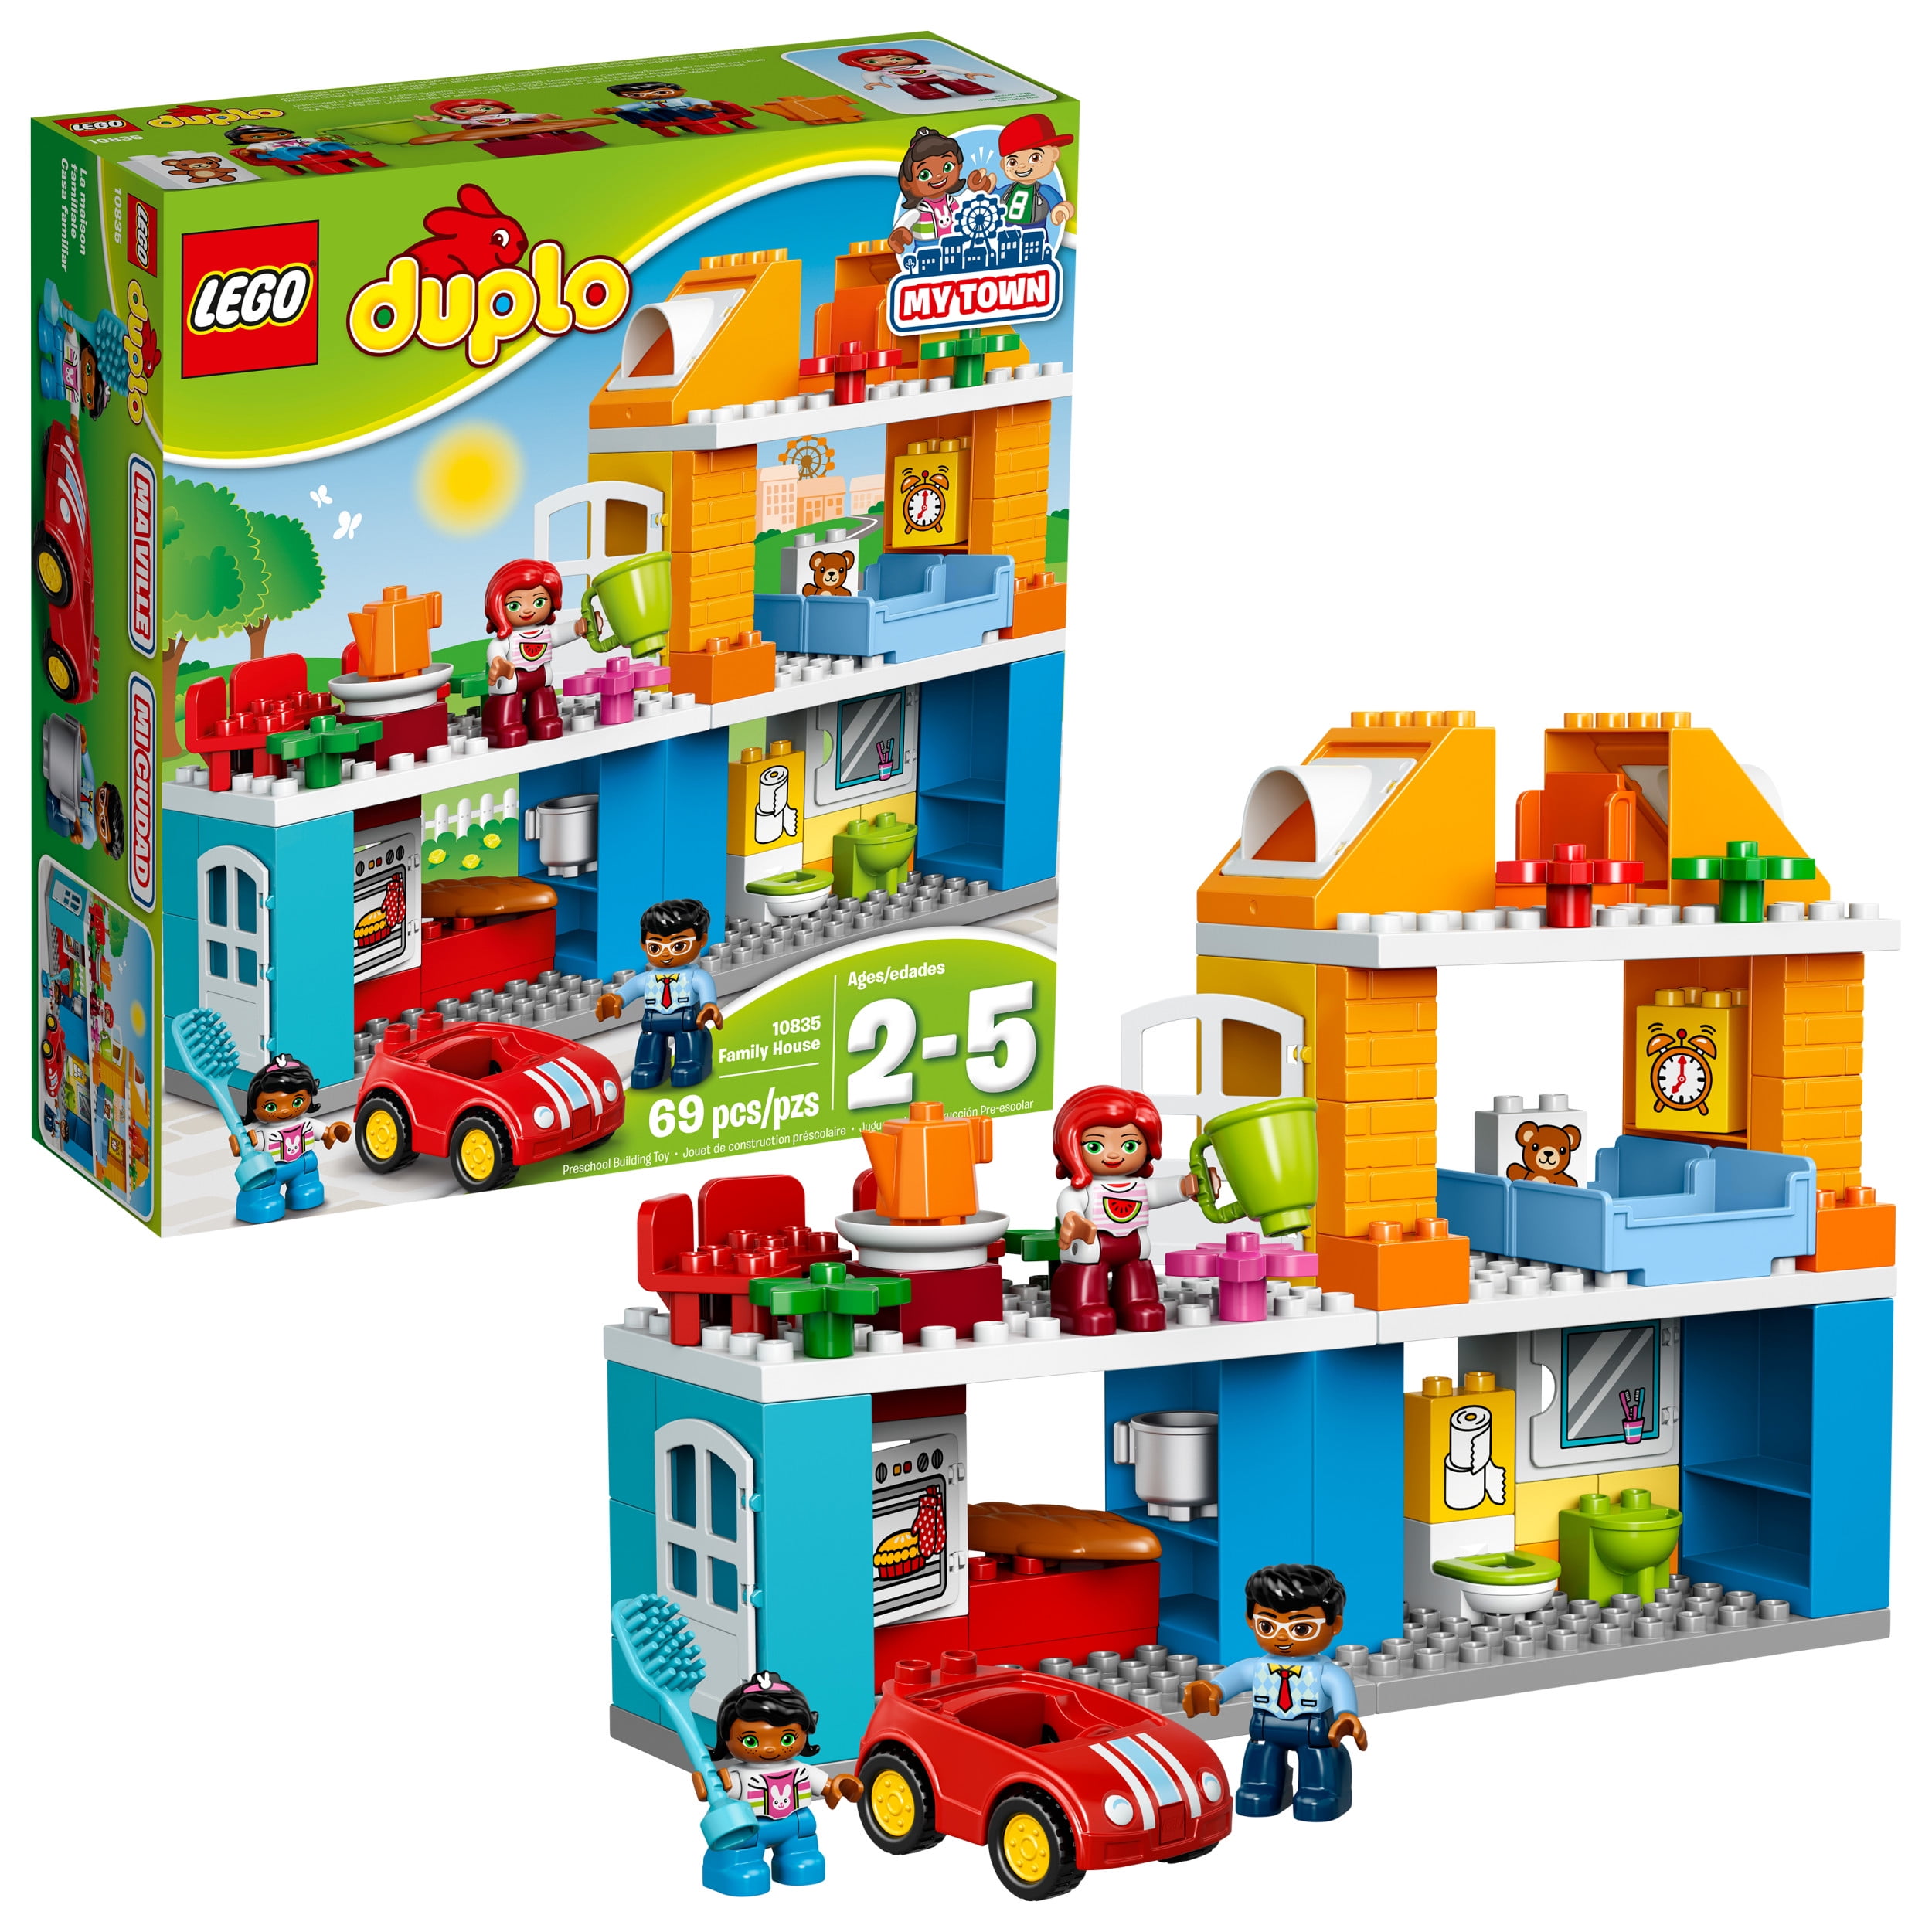 NEW AND SEALED Lego Duplo Family House My town 69 Pcs kit 10835 US Stock